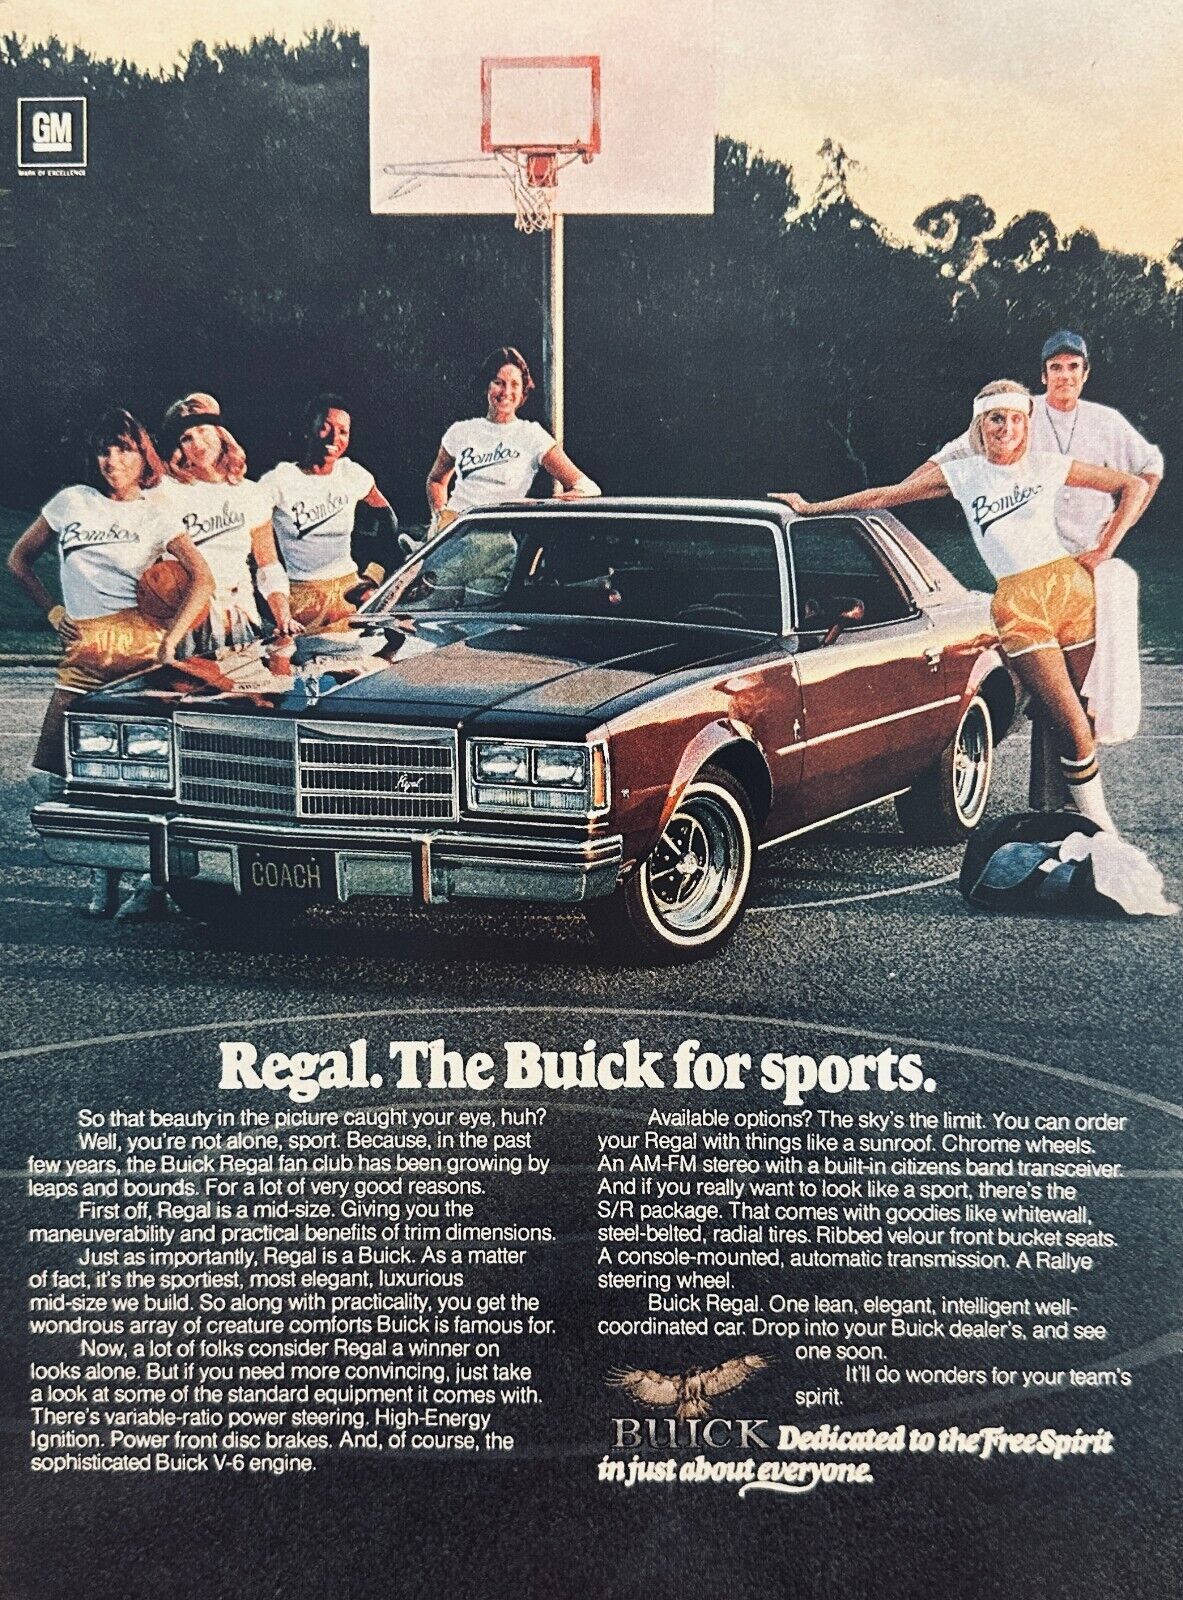 Lot of (7) Buick Regal Advertisements - Nearly 2 Decades Worth of Model History